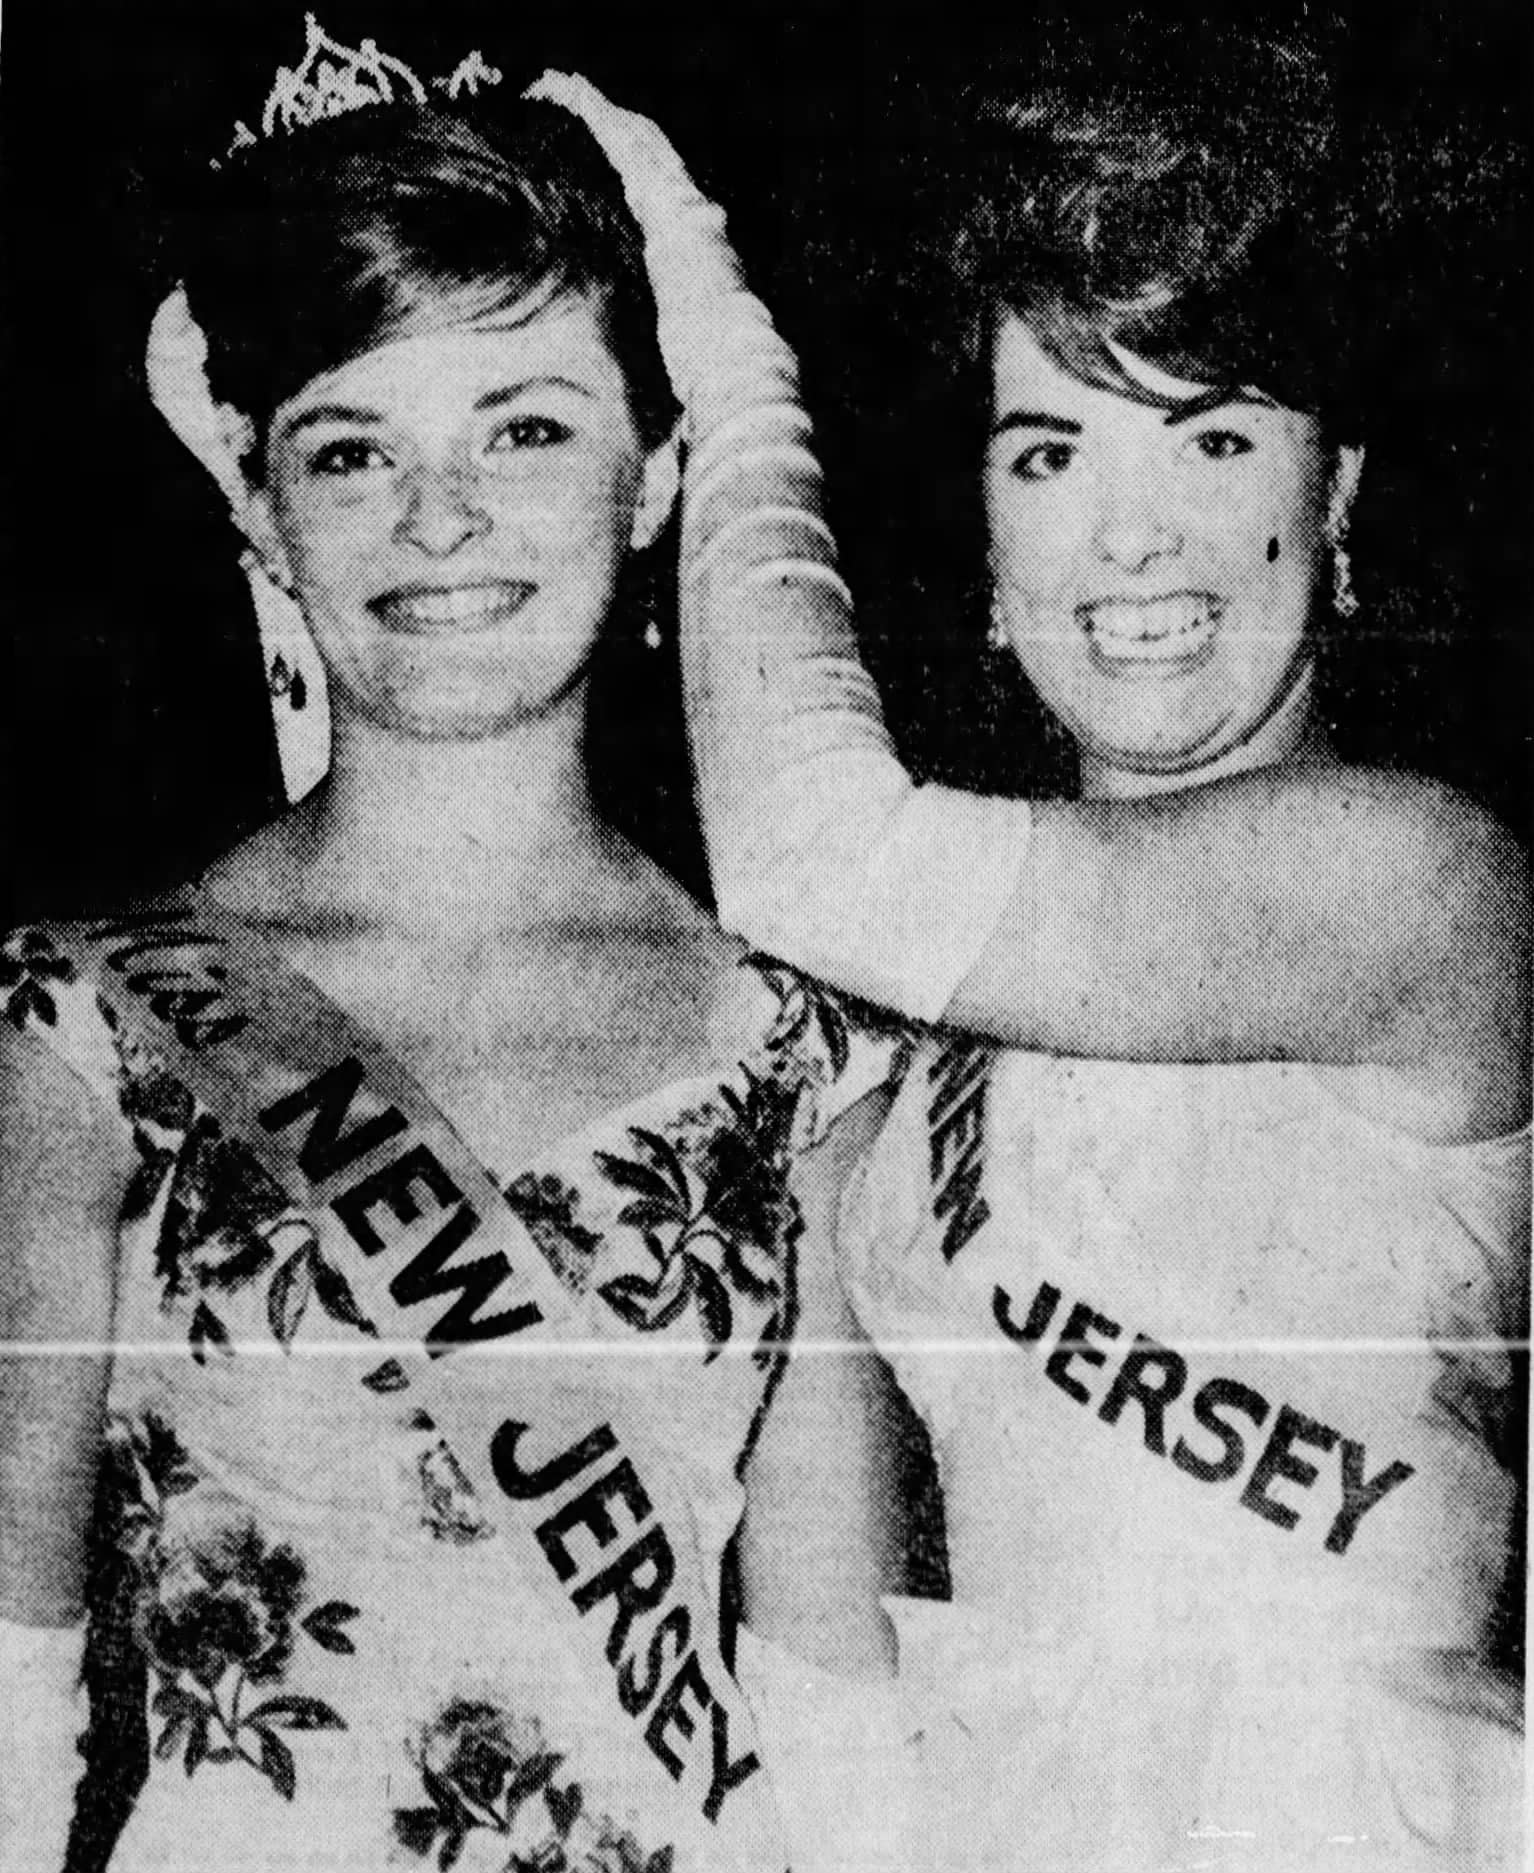 Barbara Richartz is crowned Miss New Jersey USA 1964